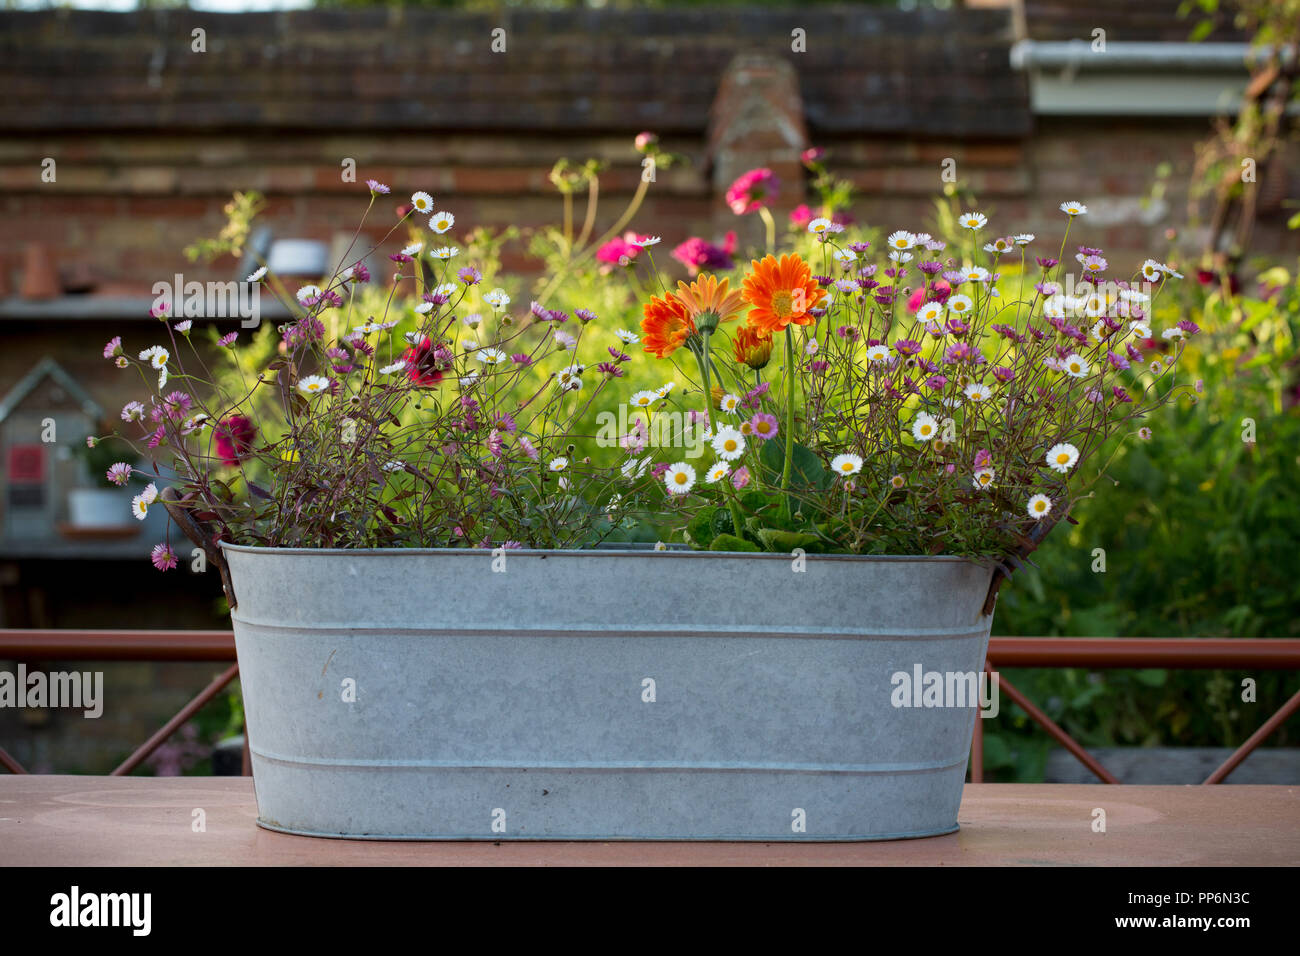 Selection of wild flowers and daisies planted in oval zinc container. Stock Photo